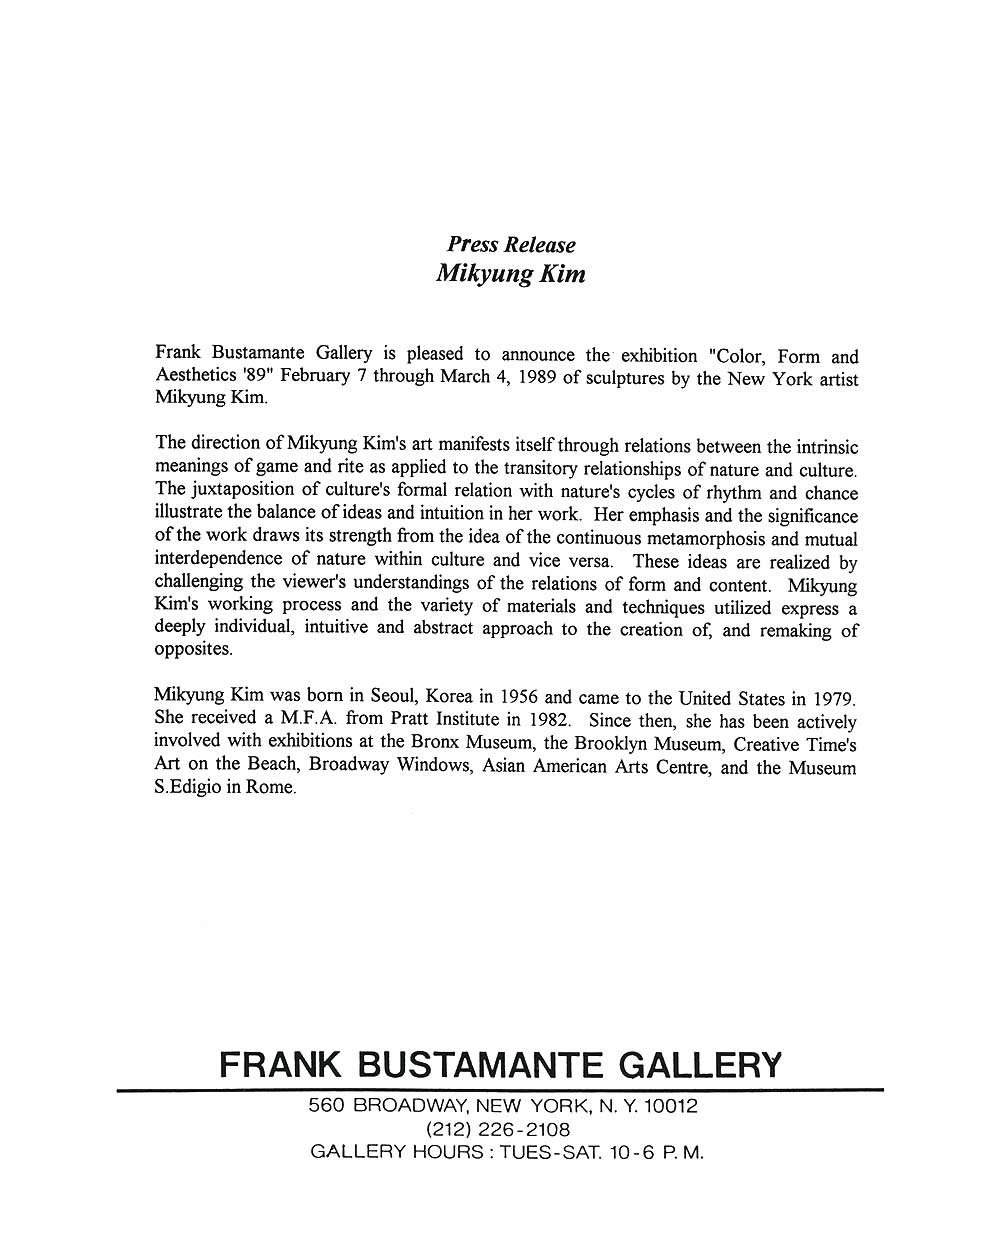 Color, Form and Aesthetics '89, press release